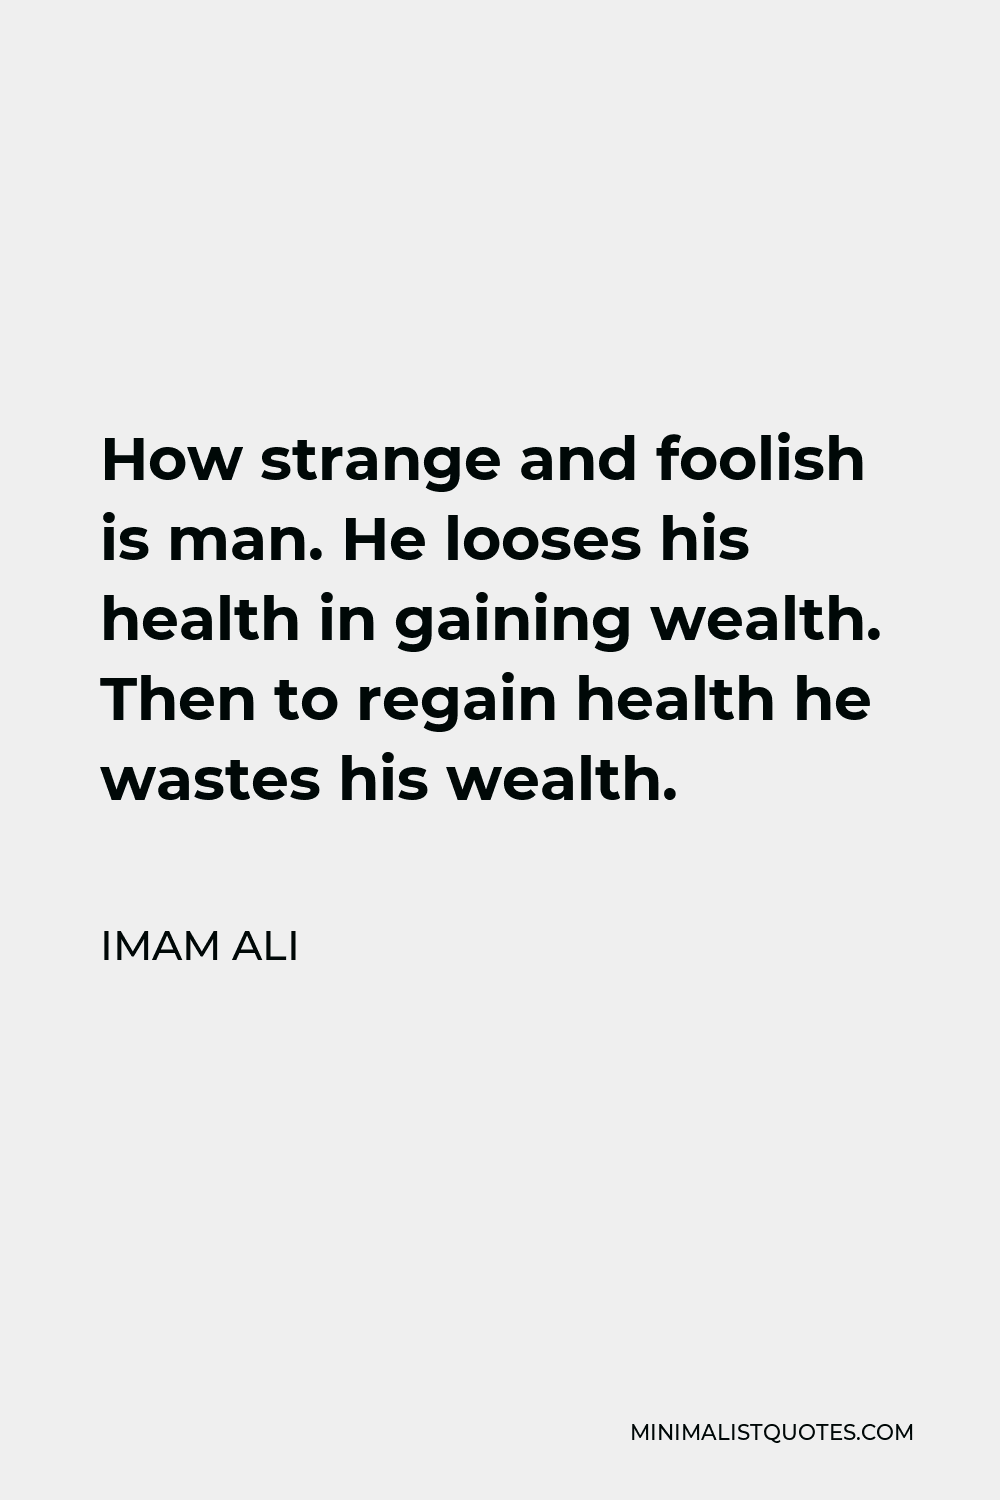 Imam Ali Quote - How strange and foolish is man. He looses his health in gaining wealth. Then to regain health he wastes his wealth.